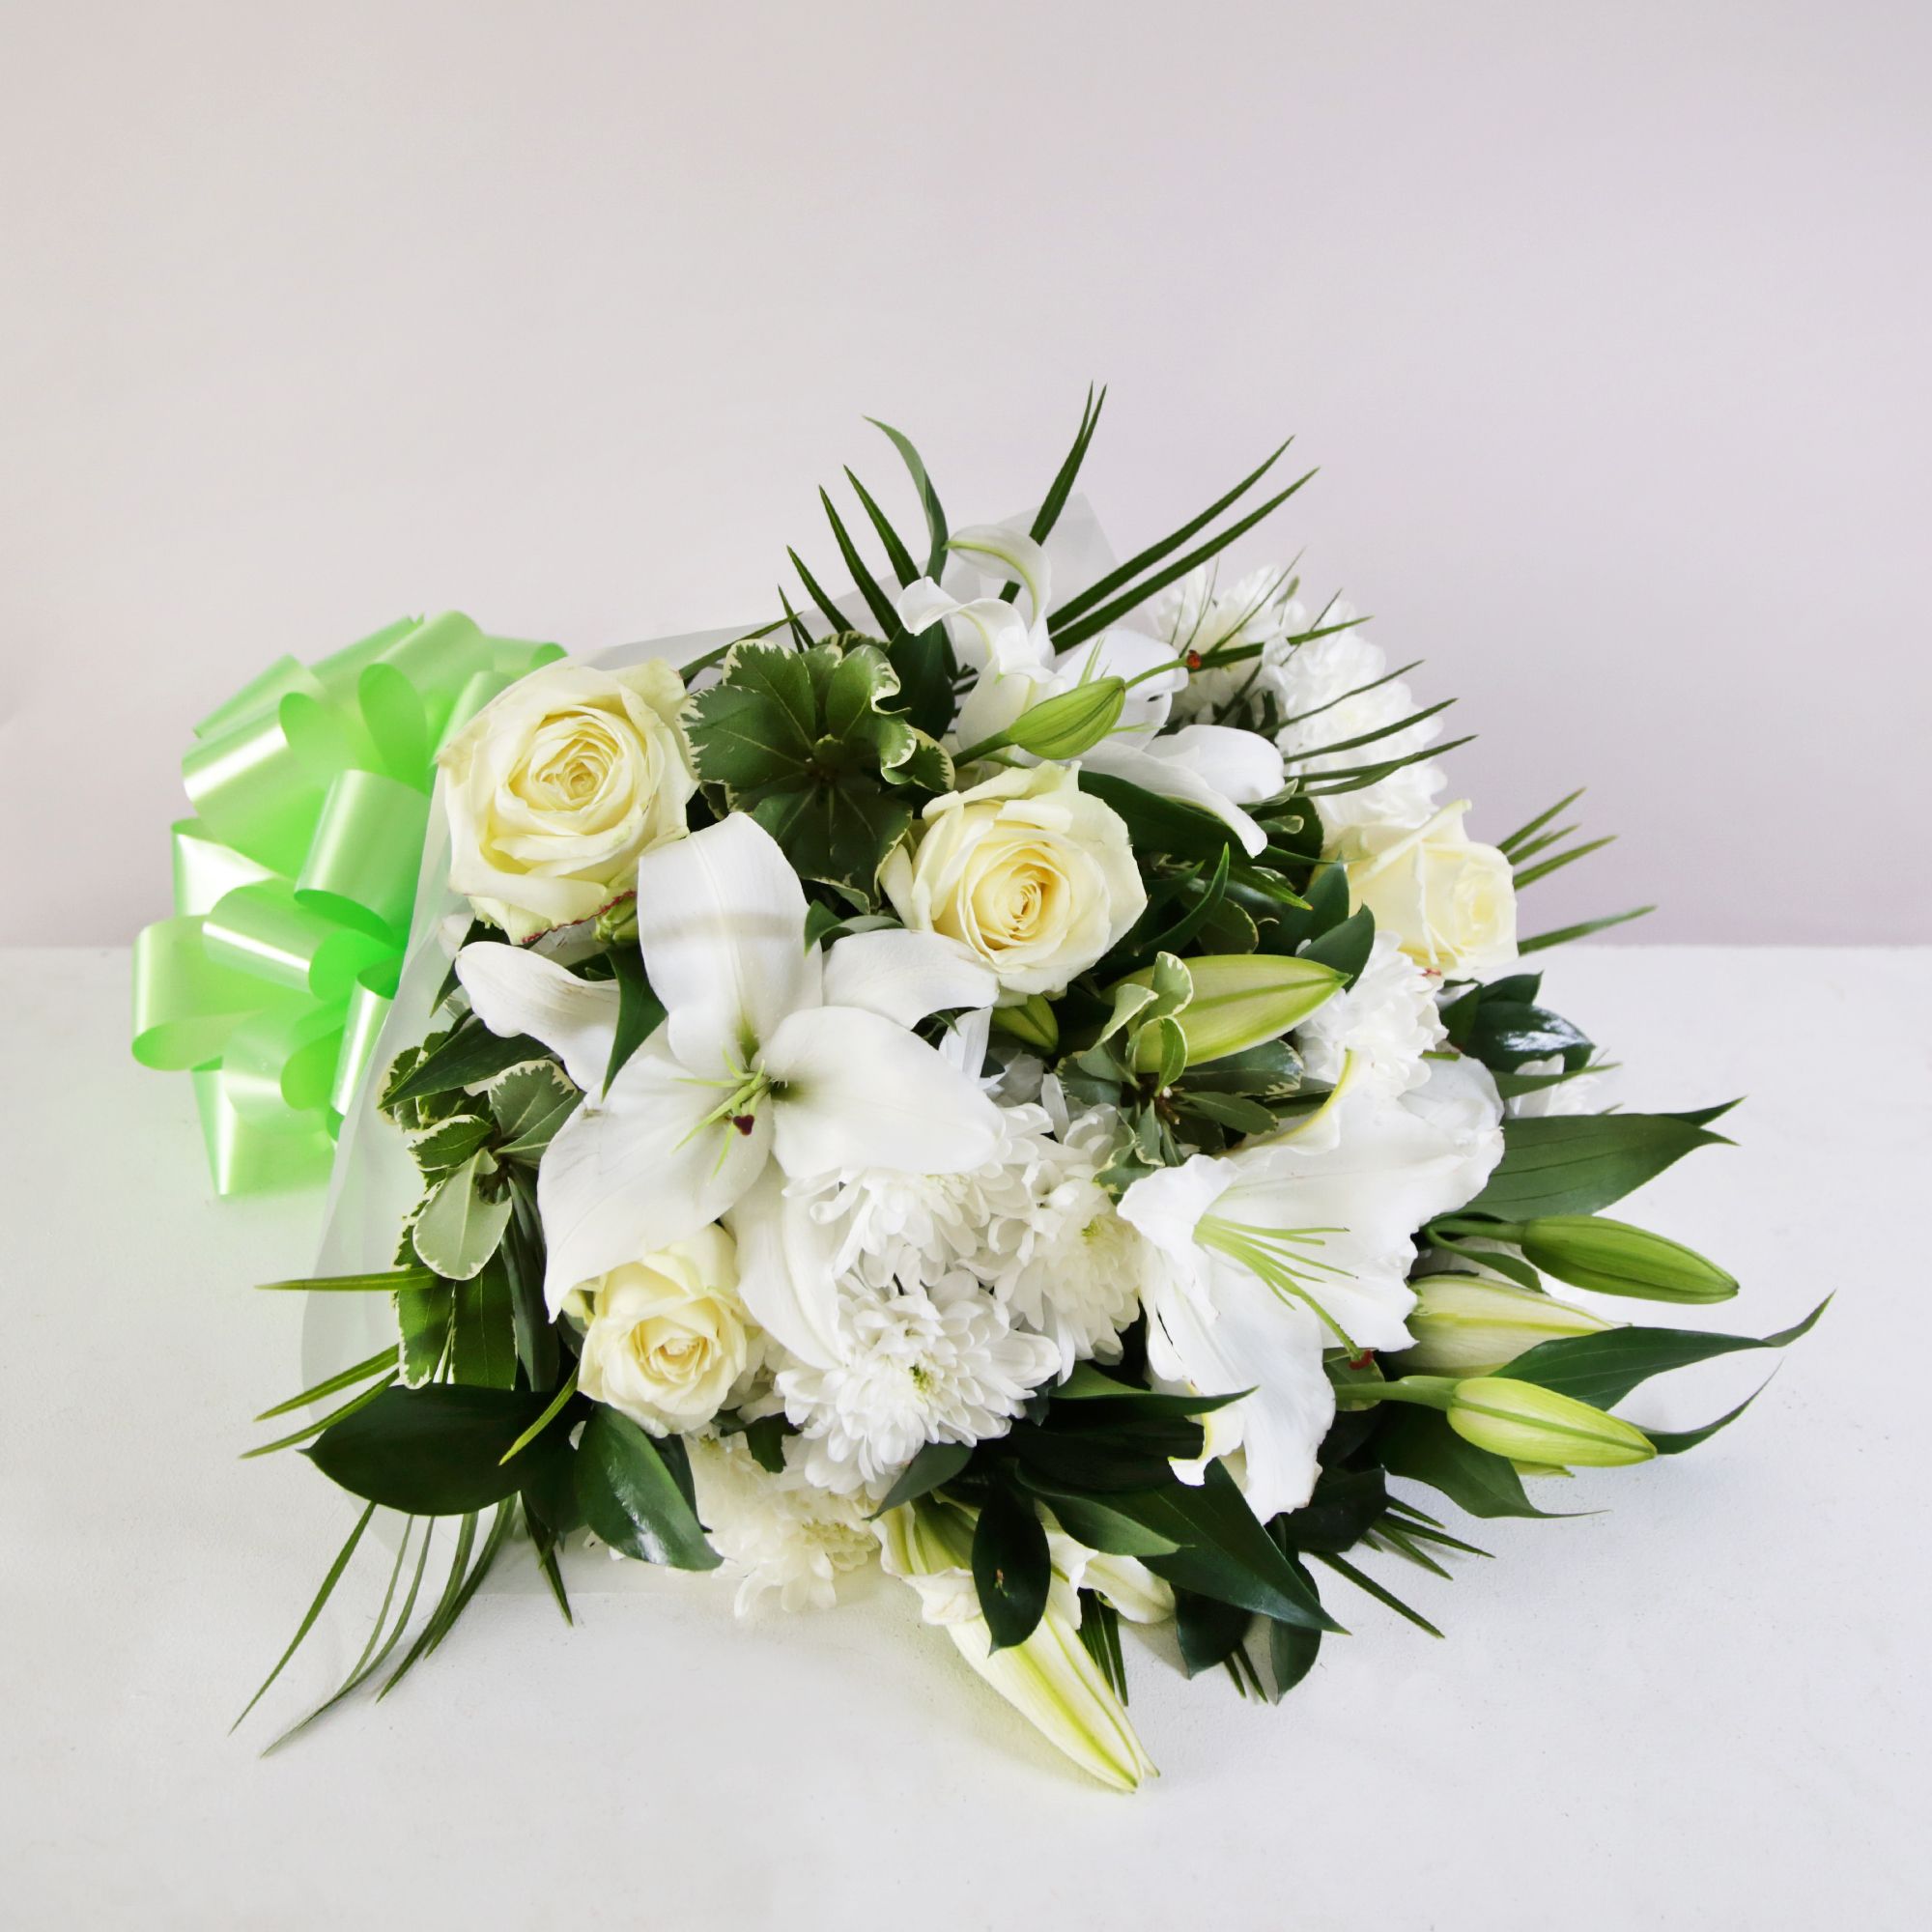 White Lily Rose Funeral Sheaf